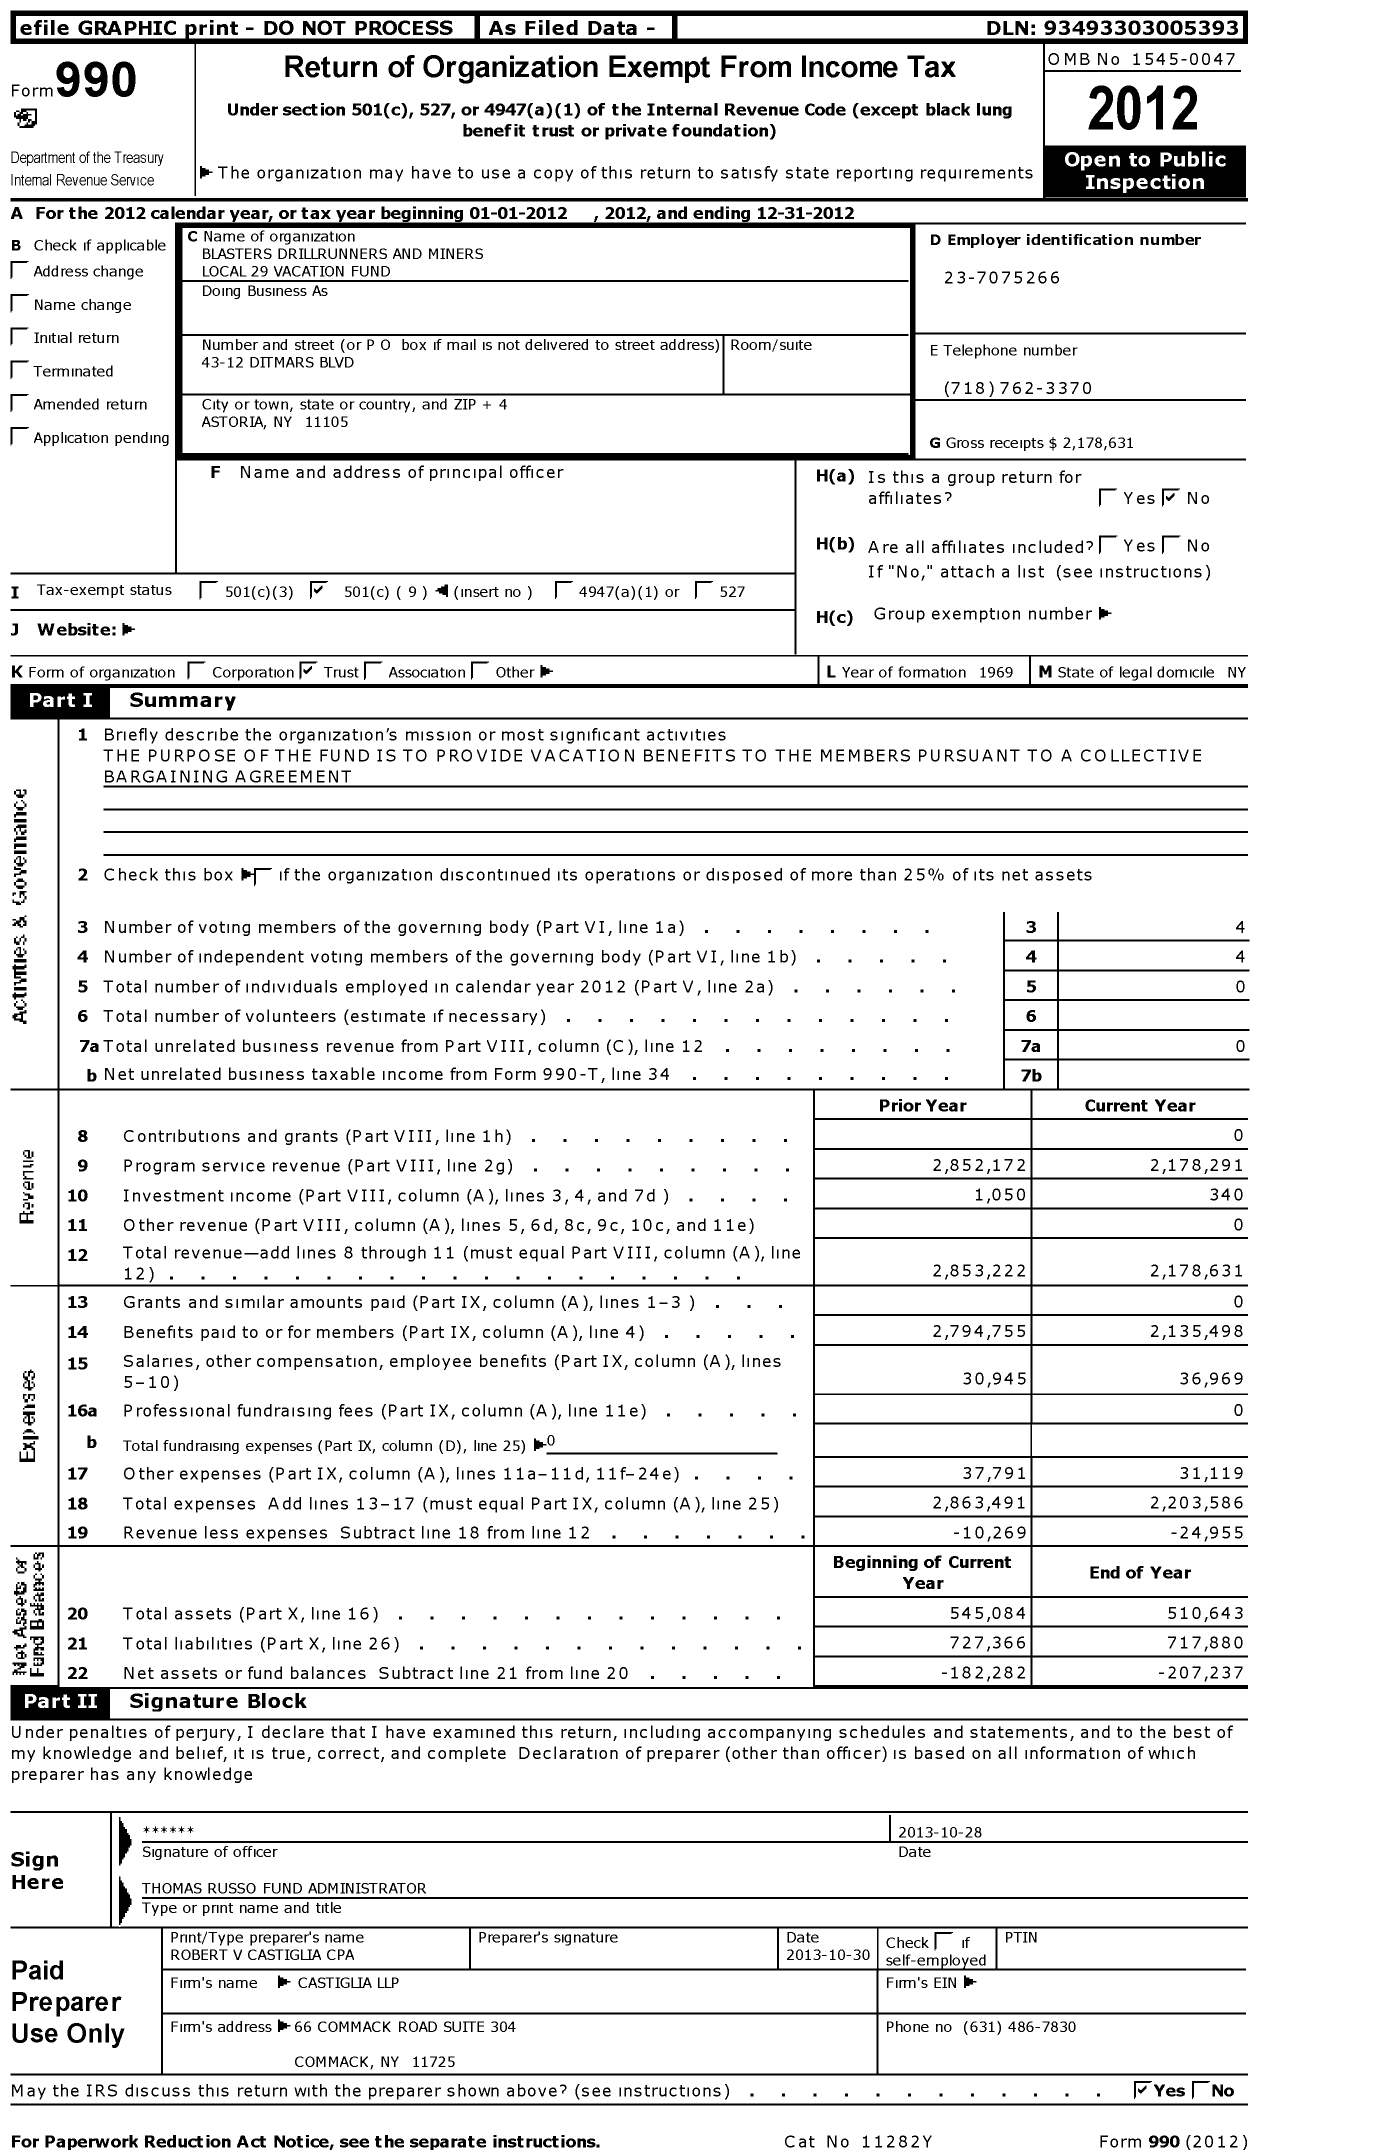 Image of first page of 2012 Form 990O for Blasters Drillrunners and Miners Local 29 Vacation Fund